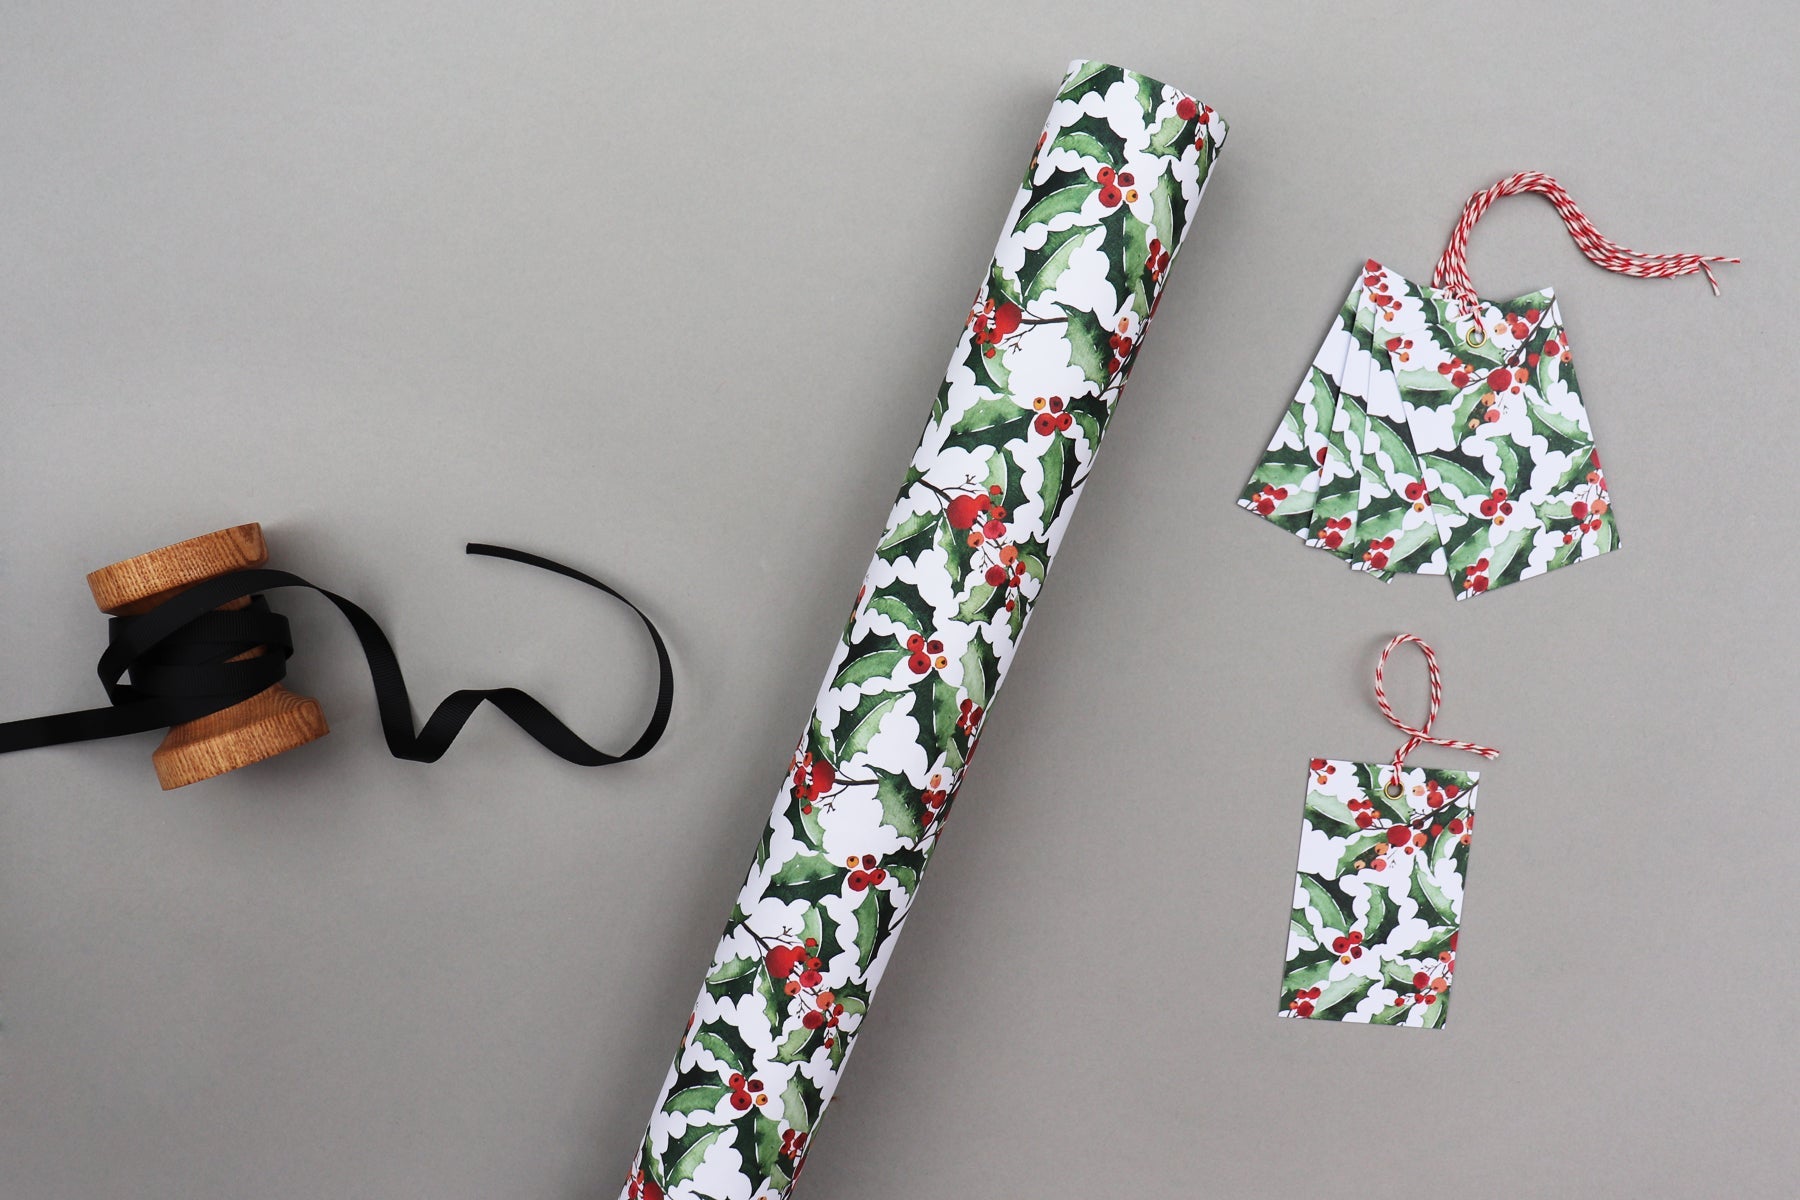 GREEN HOLLY WRAPPING PAPER BUNDLE